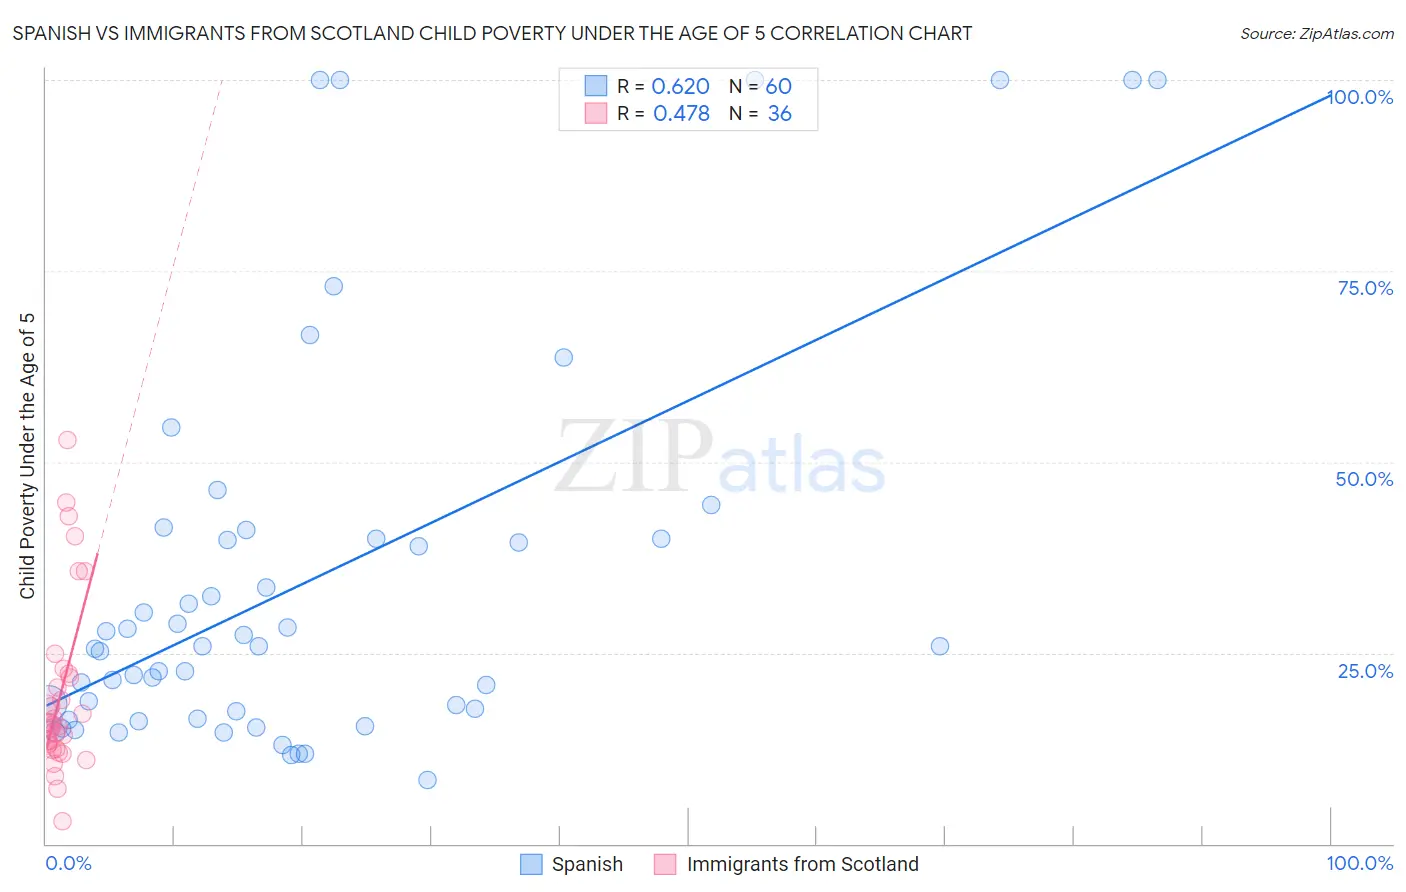 Spanish vs Immigrants from Scotland Child Poverty Under the Age of 5